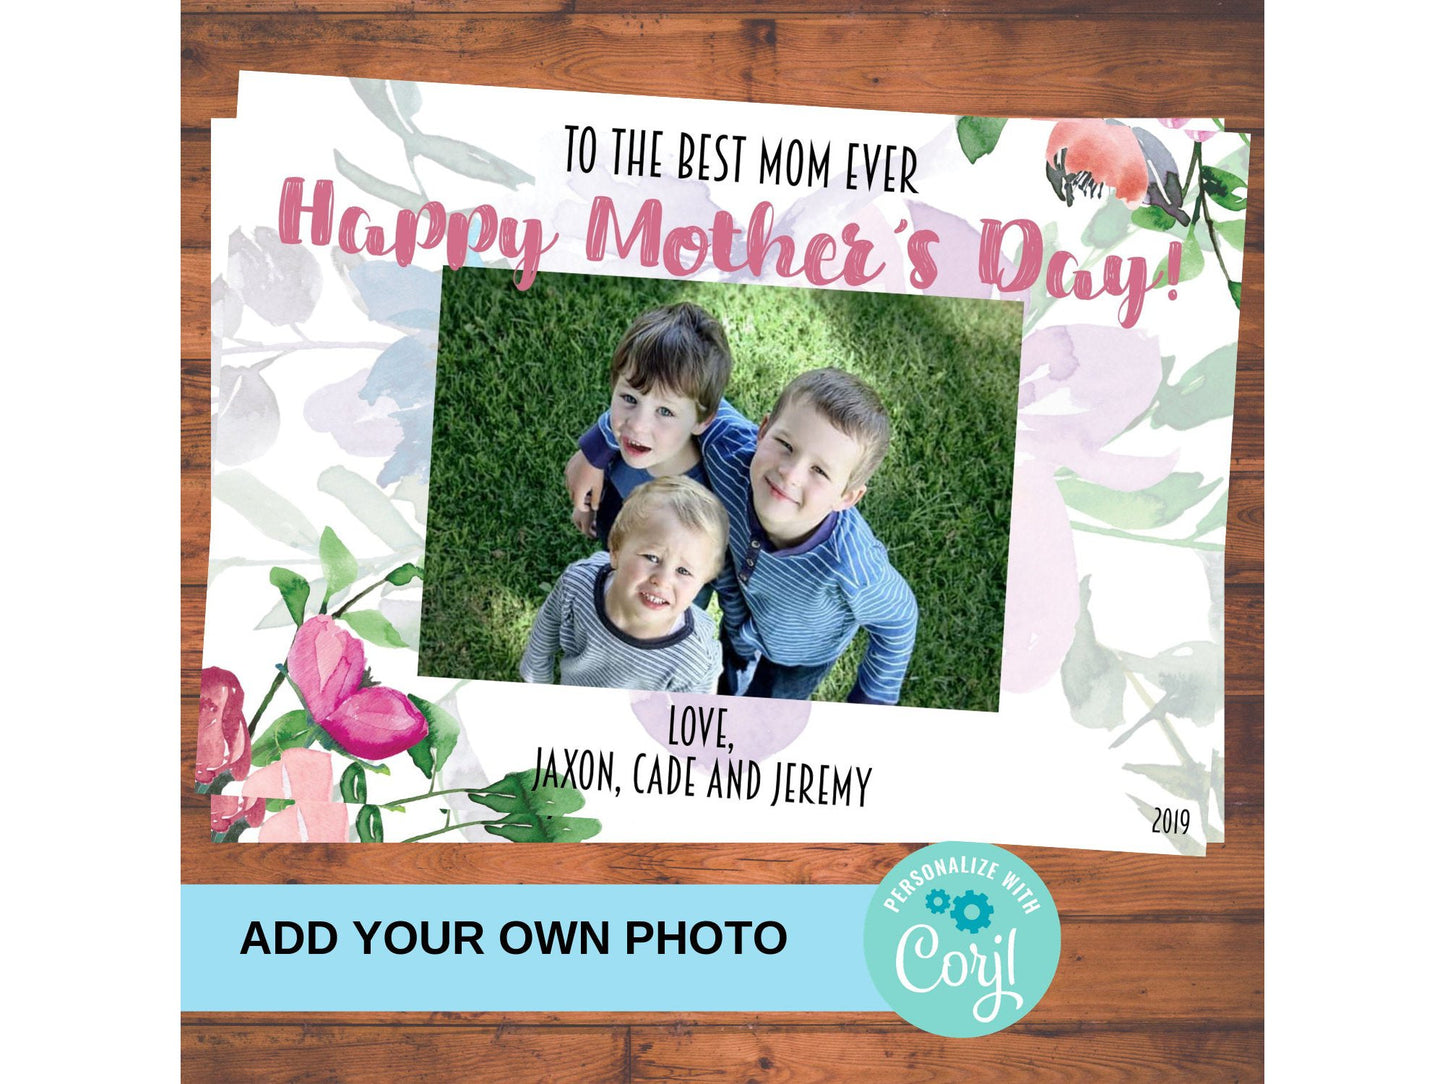 Printable Mother's Day Card - Add Your Own Photo and Text - Pretty Personalized Mother's Day Gift Card - To The Best Mom Ever From Kids